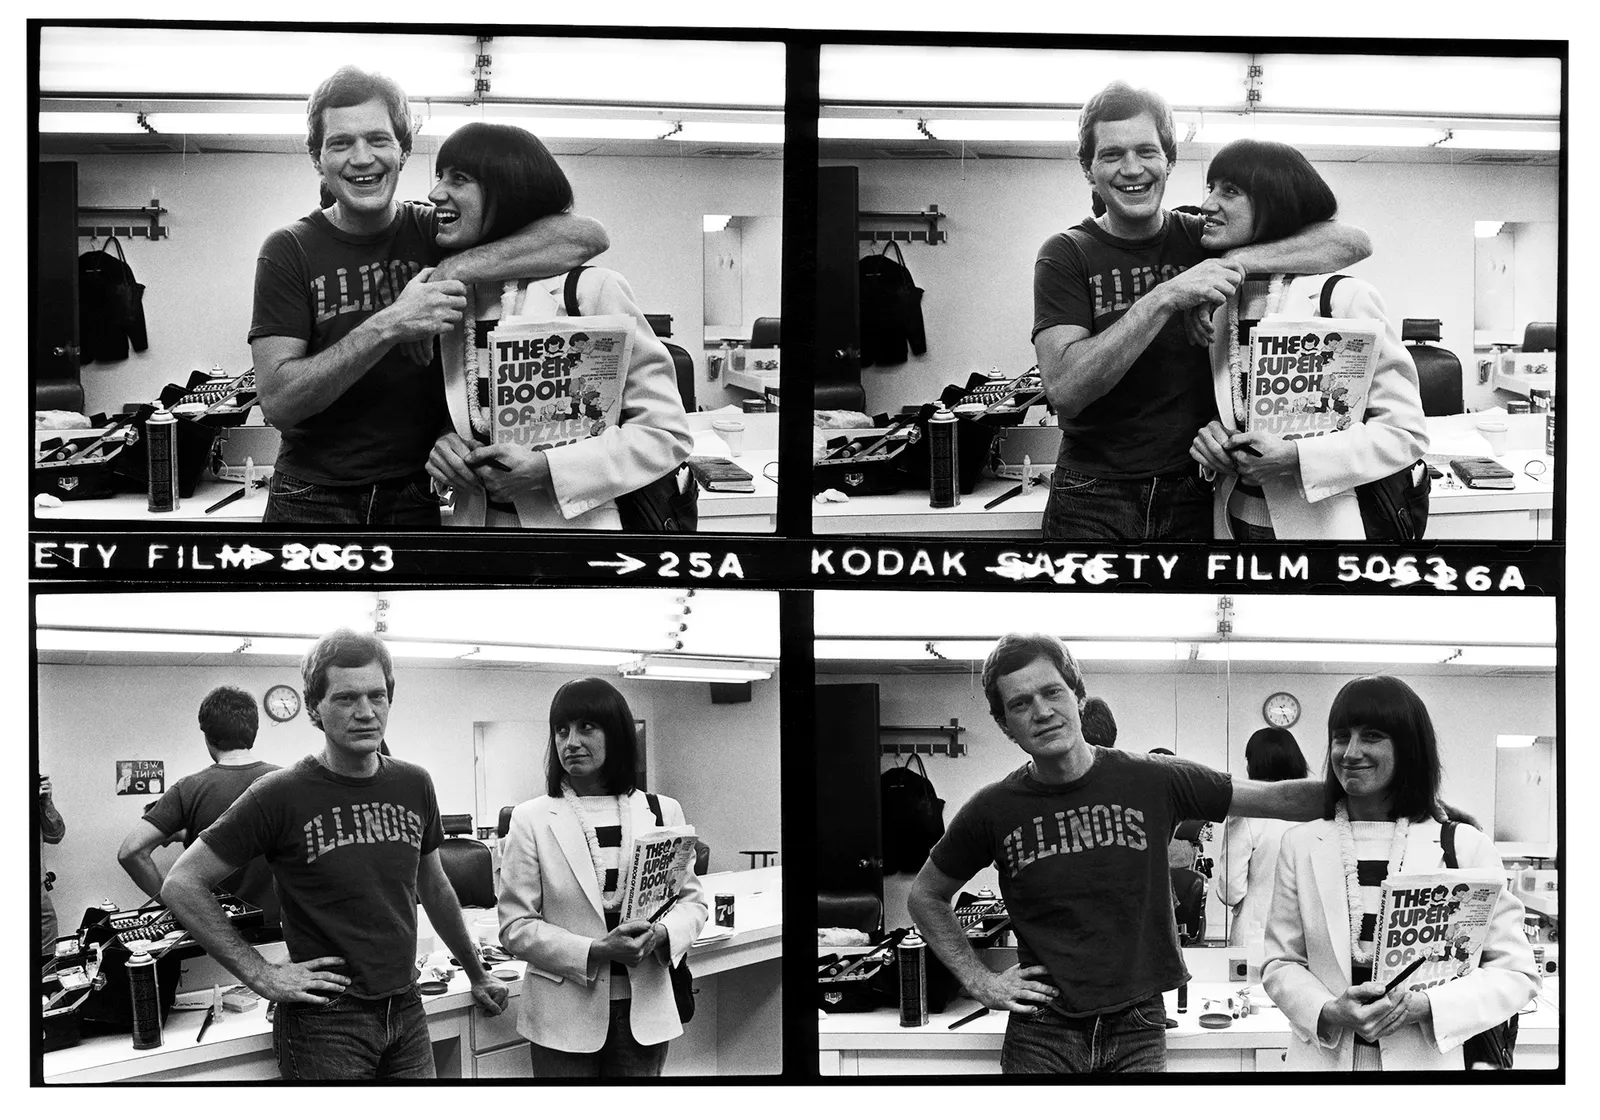 David Letterman and Merrill Markoe in a dressing room